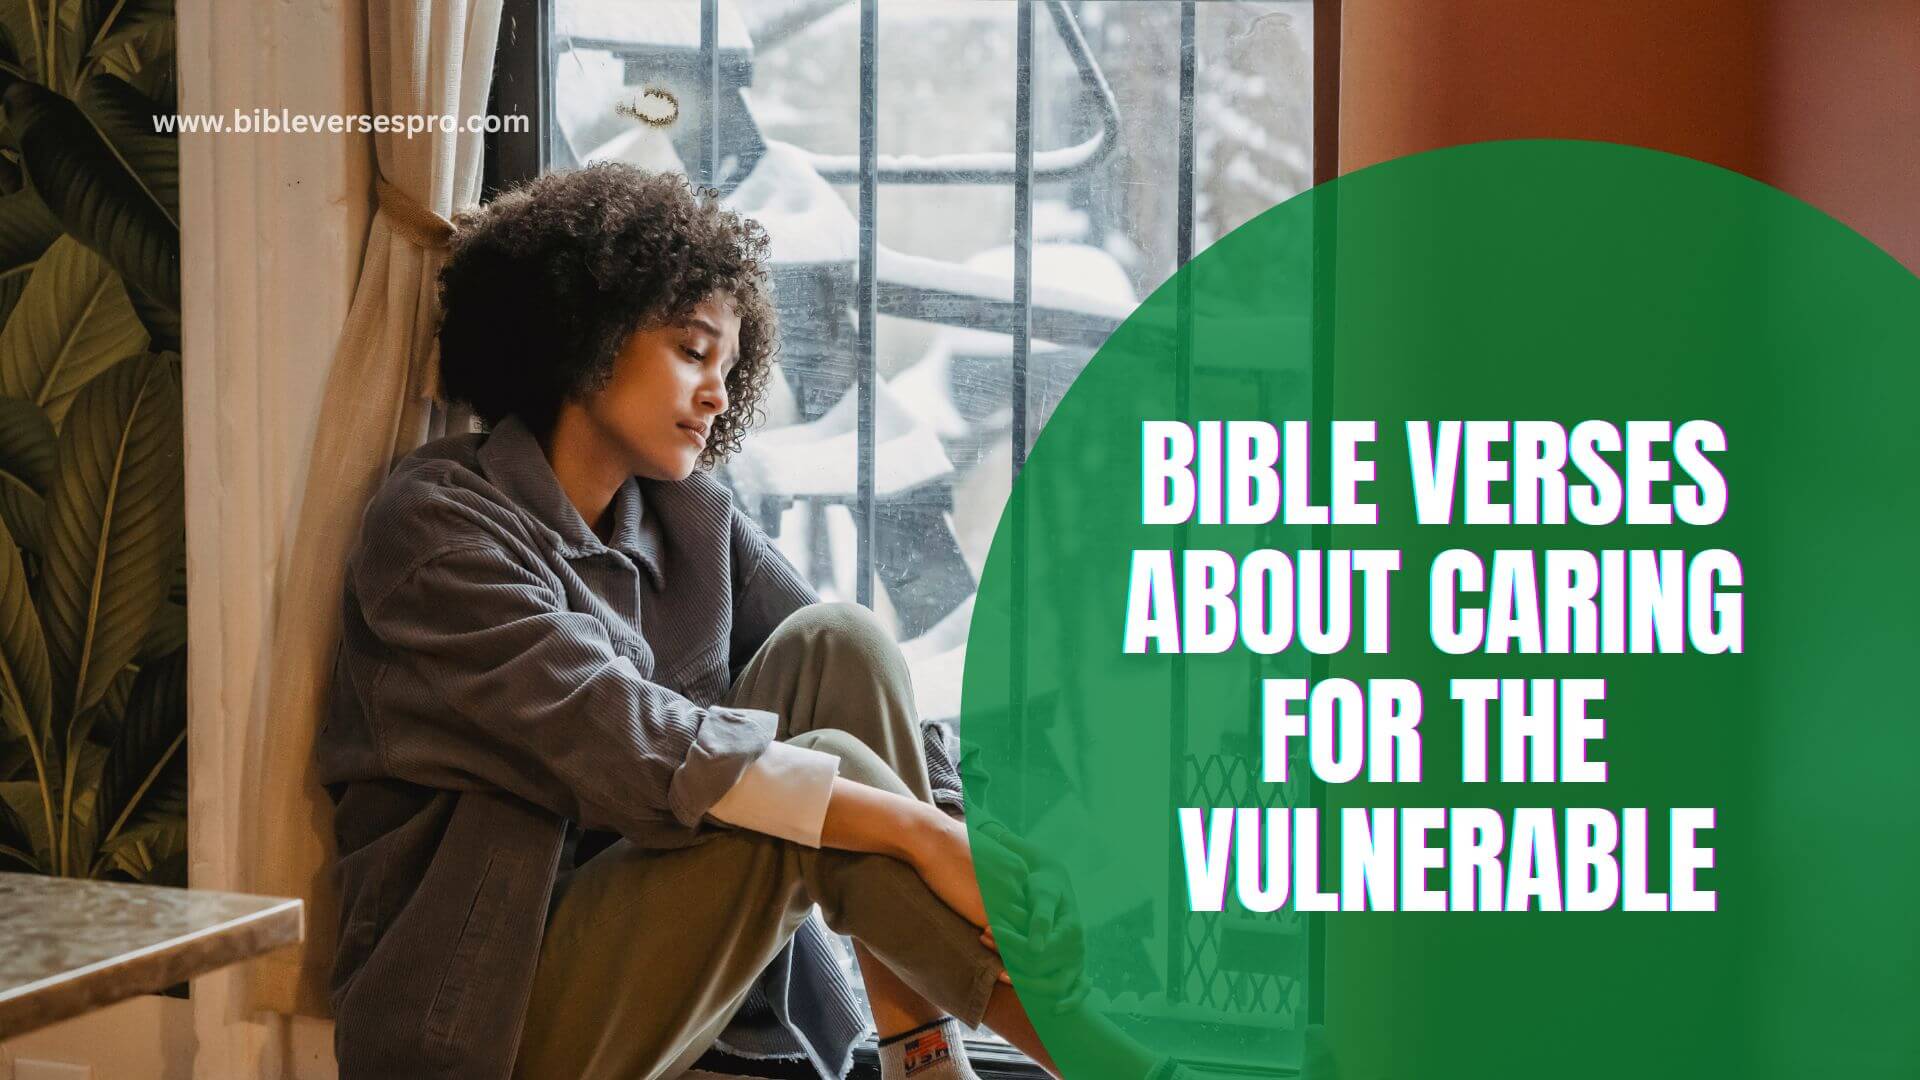 BIBLE VERSES ABOUT CARING FOR THE VULNERABLE